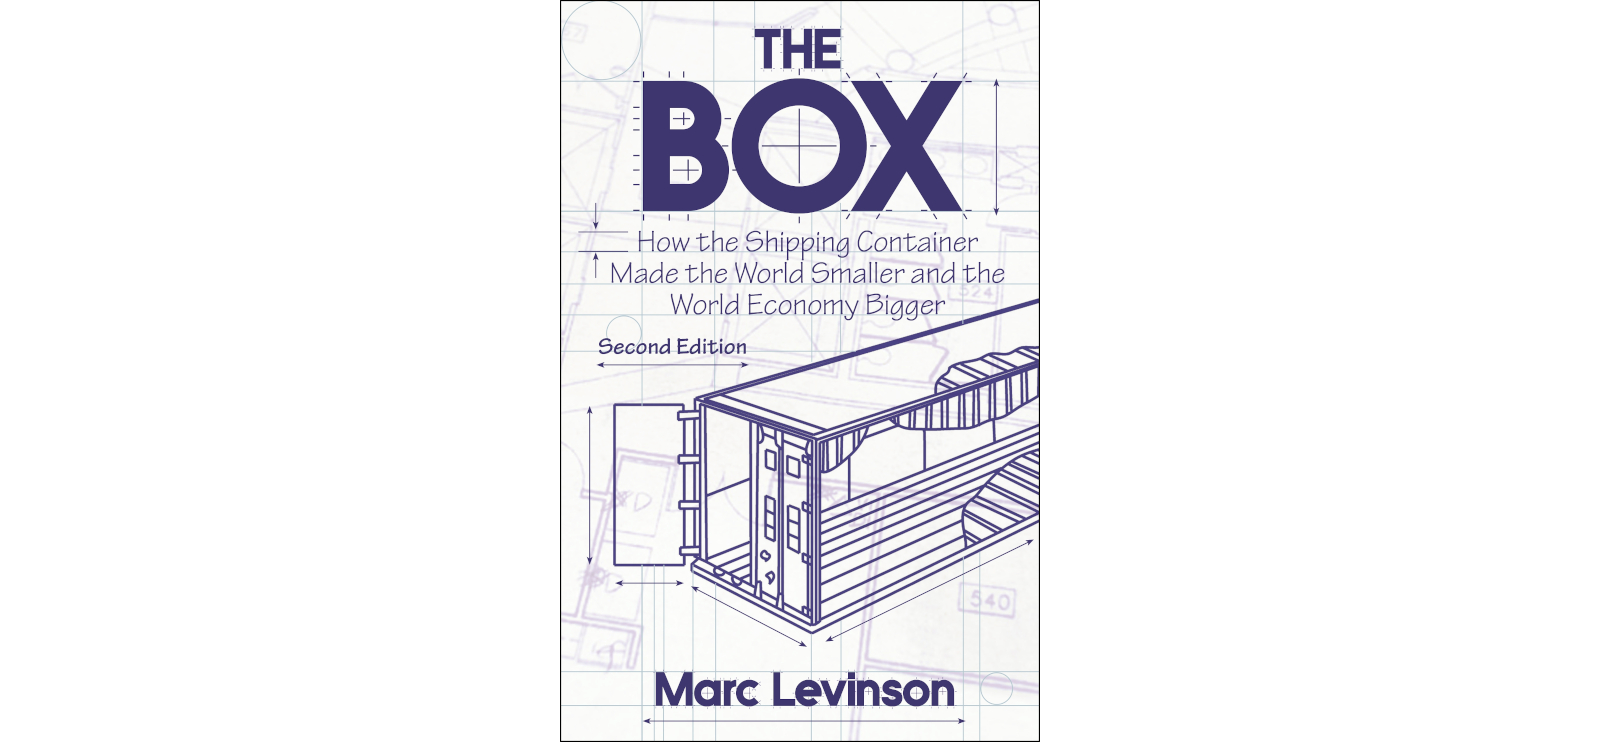 The box by Marc Levinson